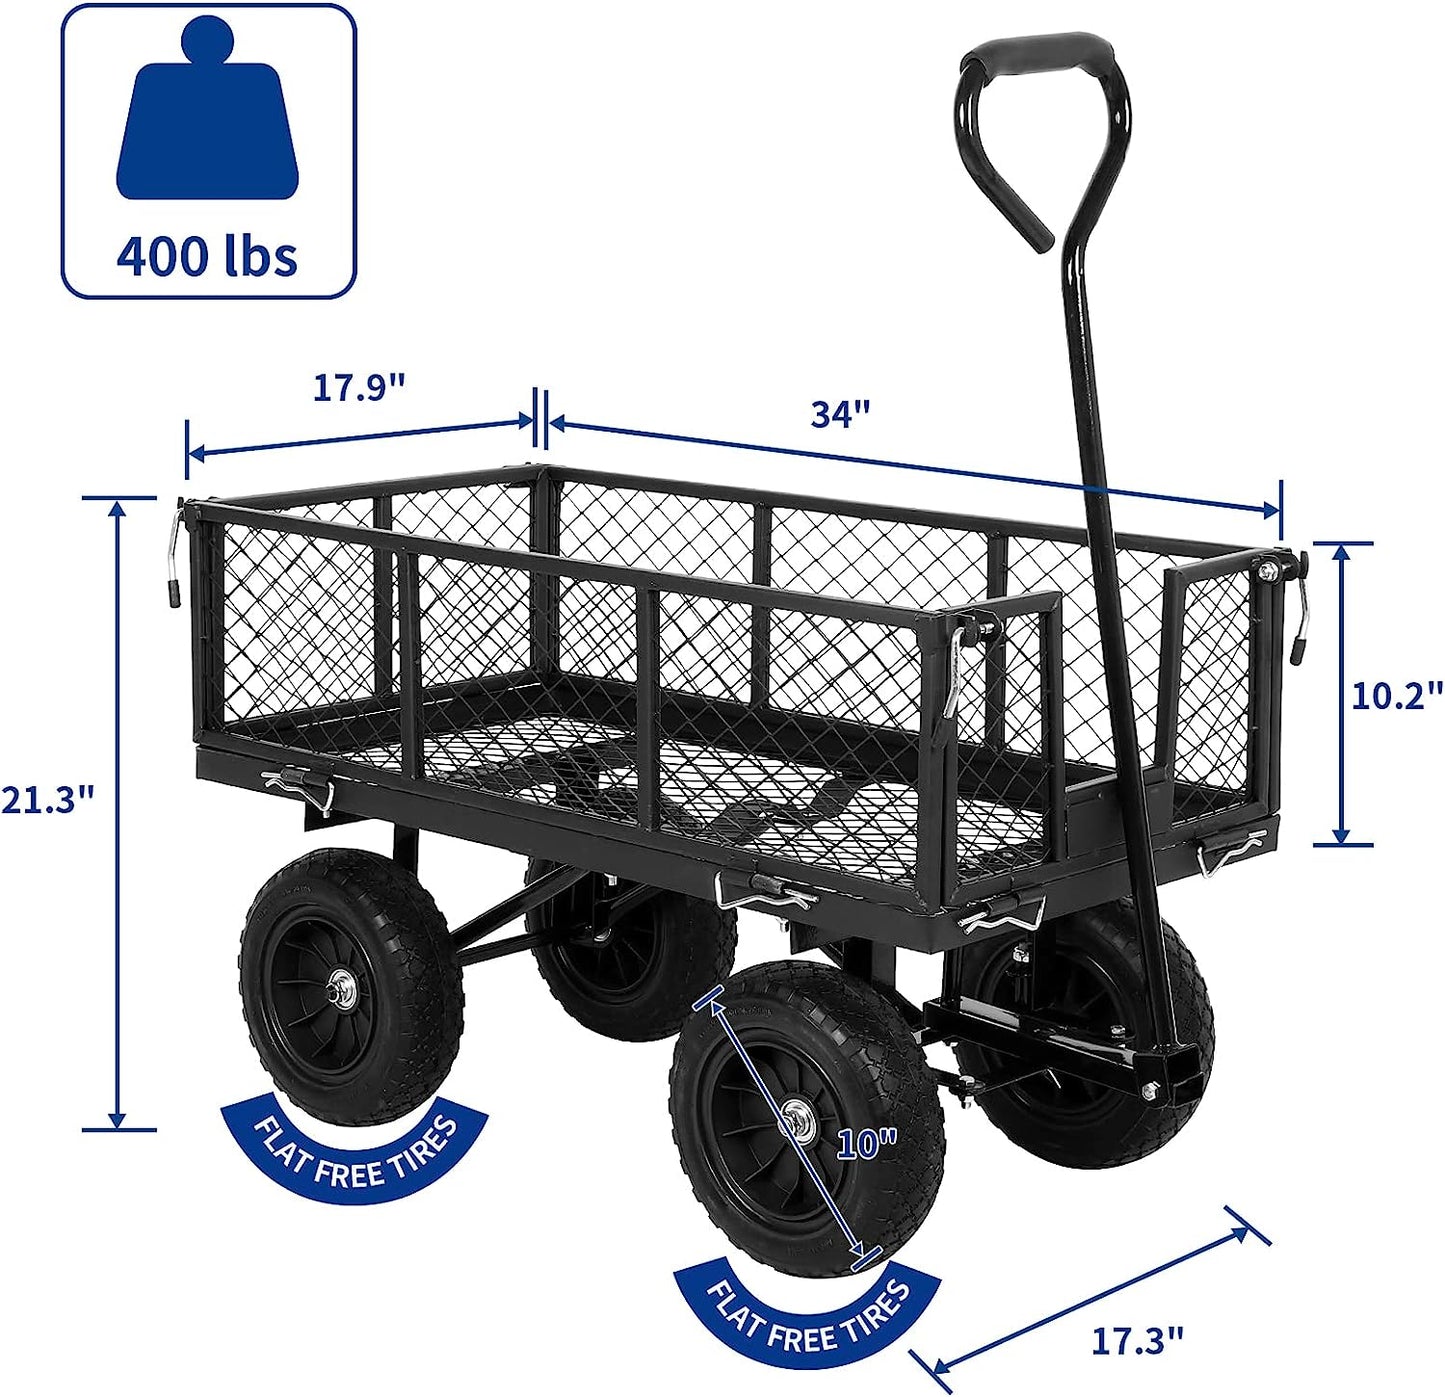 400 lbs 10" Flat Free Tires Steel Garden Cart with 180° Rotating Handle and Removable Sides, 4 Cu.Ft Capacity Utility Heavy Duty Garden Carts and Wagons